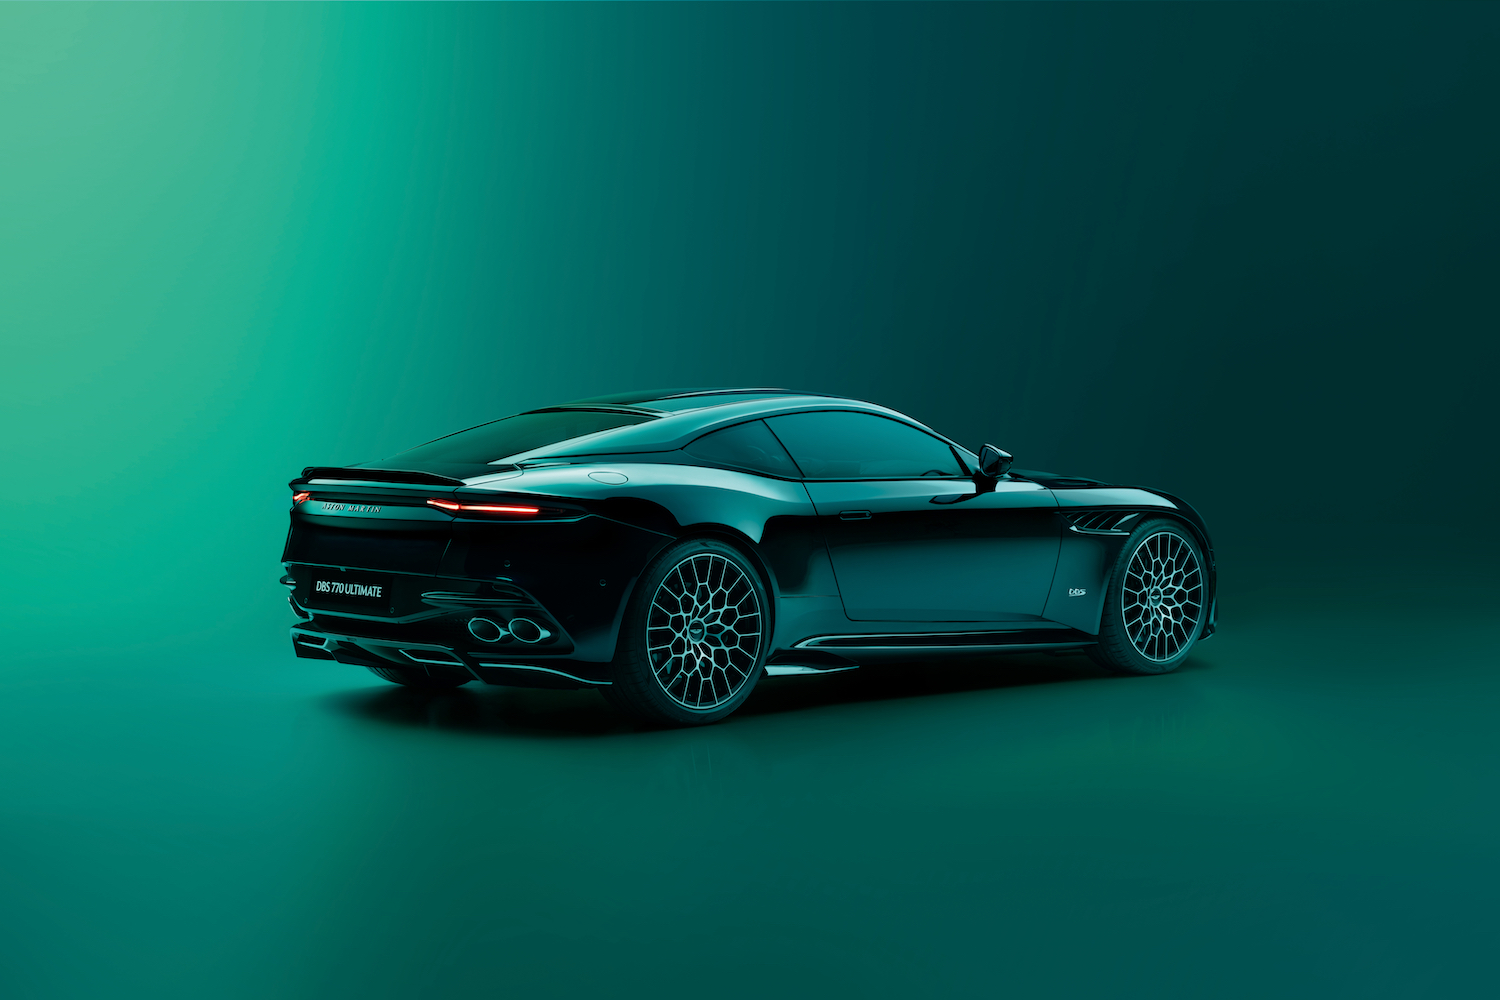 Rear end angle of 2023 Aston Martin DBS 770 Ultimate from passenger's side in a green studio with green walls.